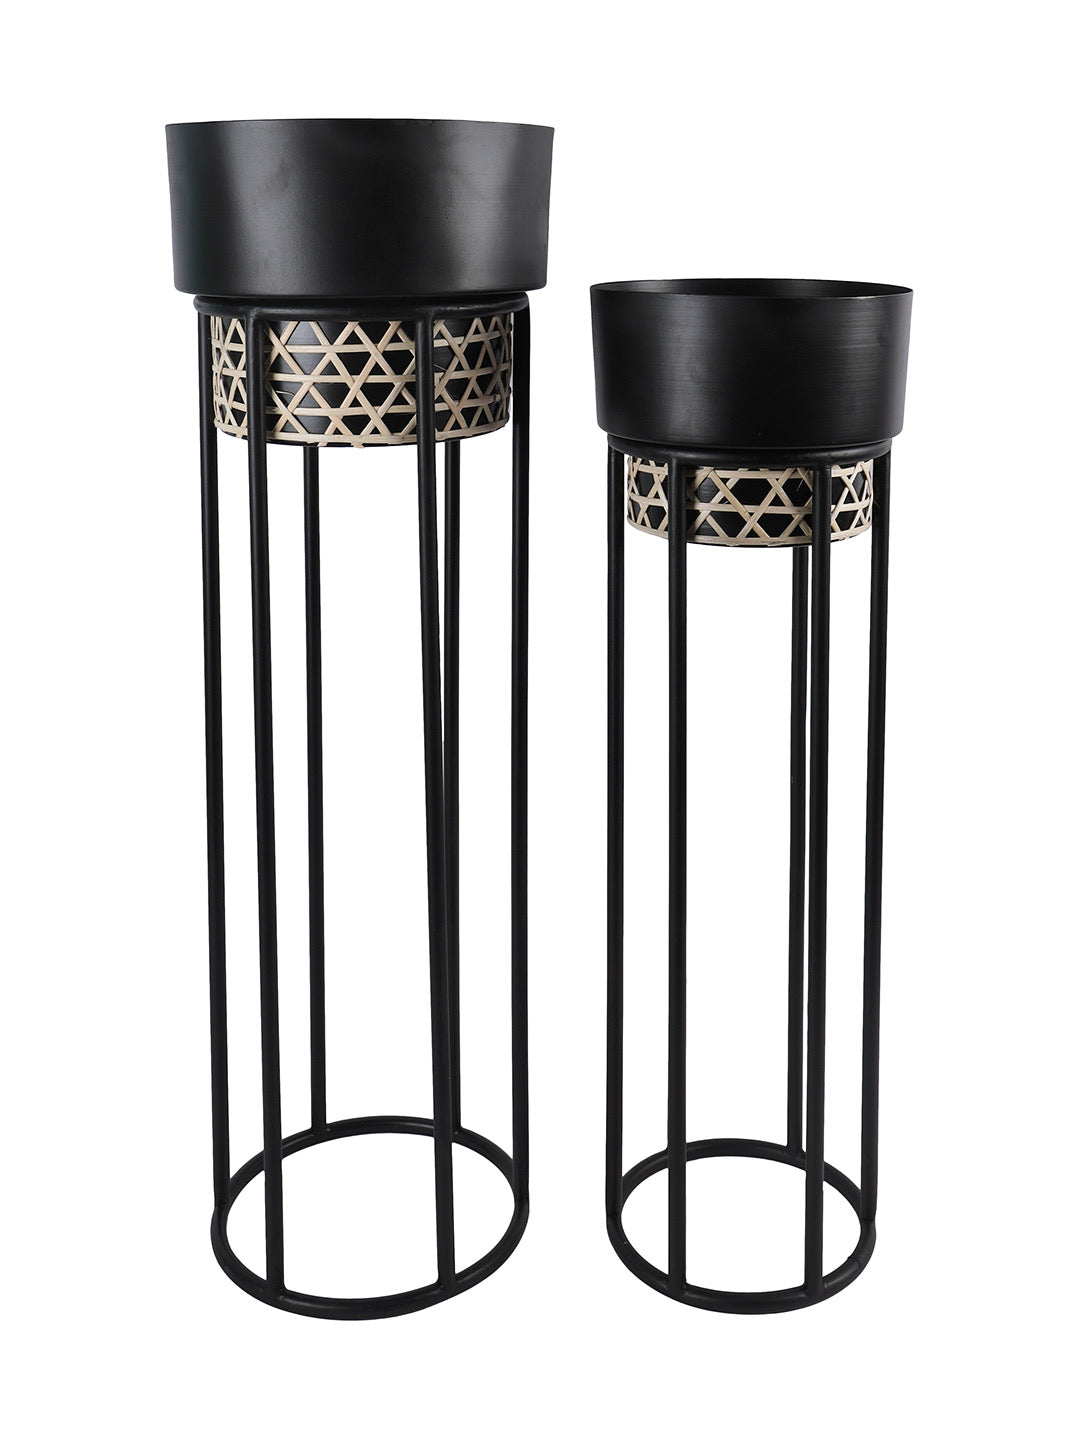 Set of 2 Black Planters with Stand - Default Title (CHM2206_2)